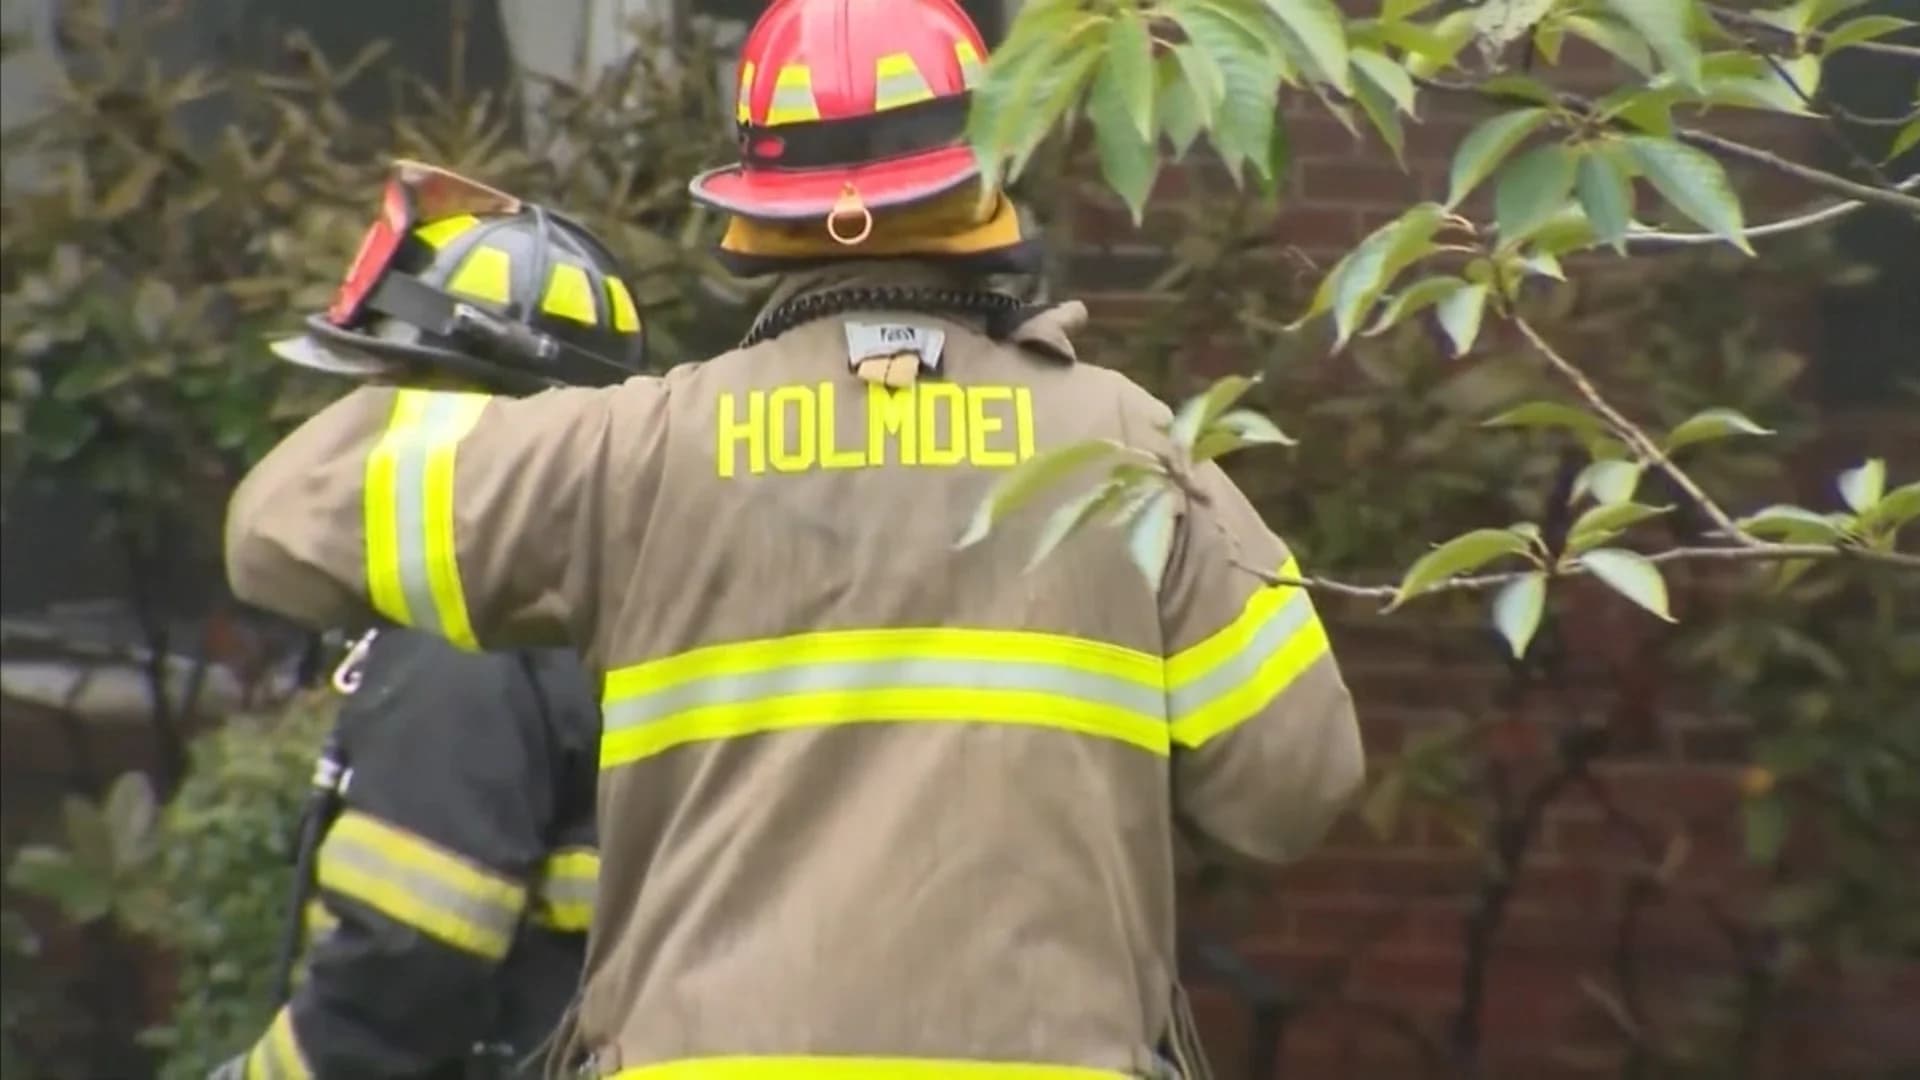 Holmdel mayor: Plans are in place to improve fire department